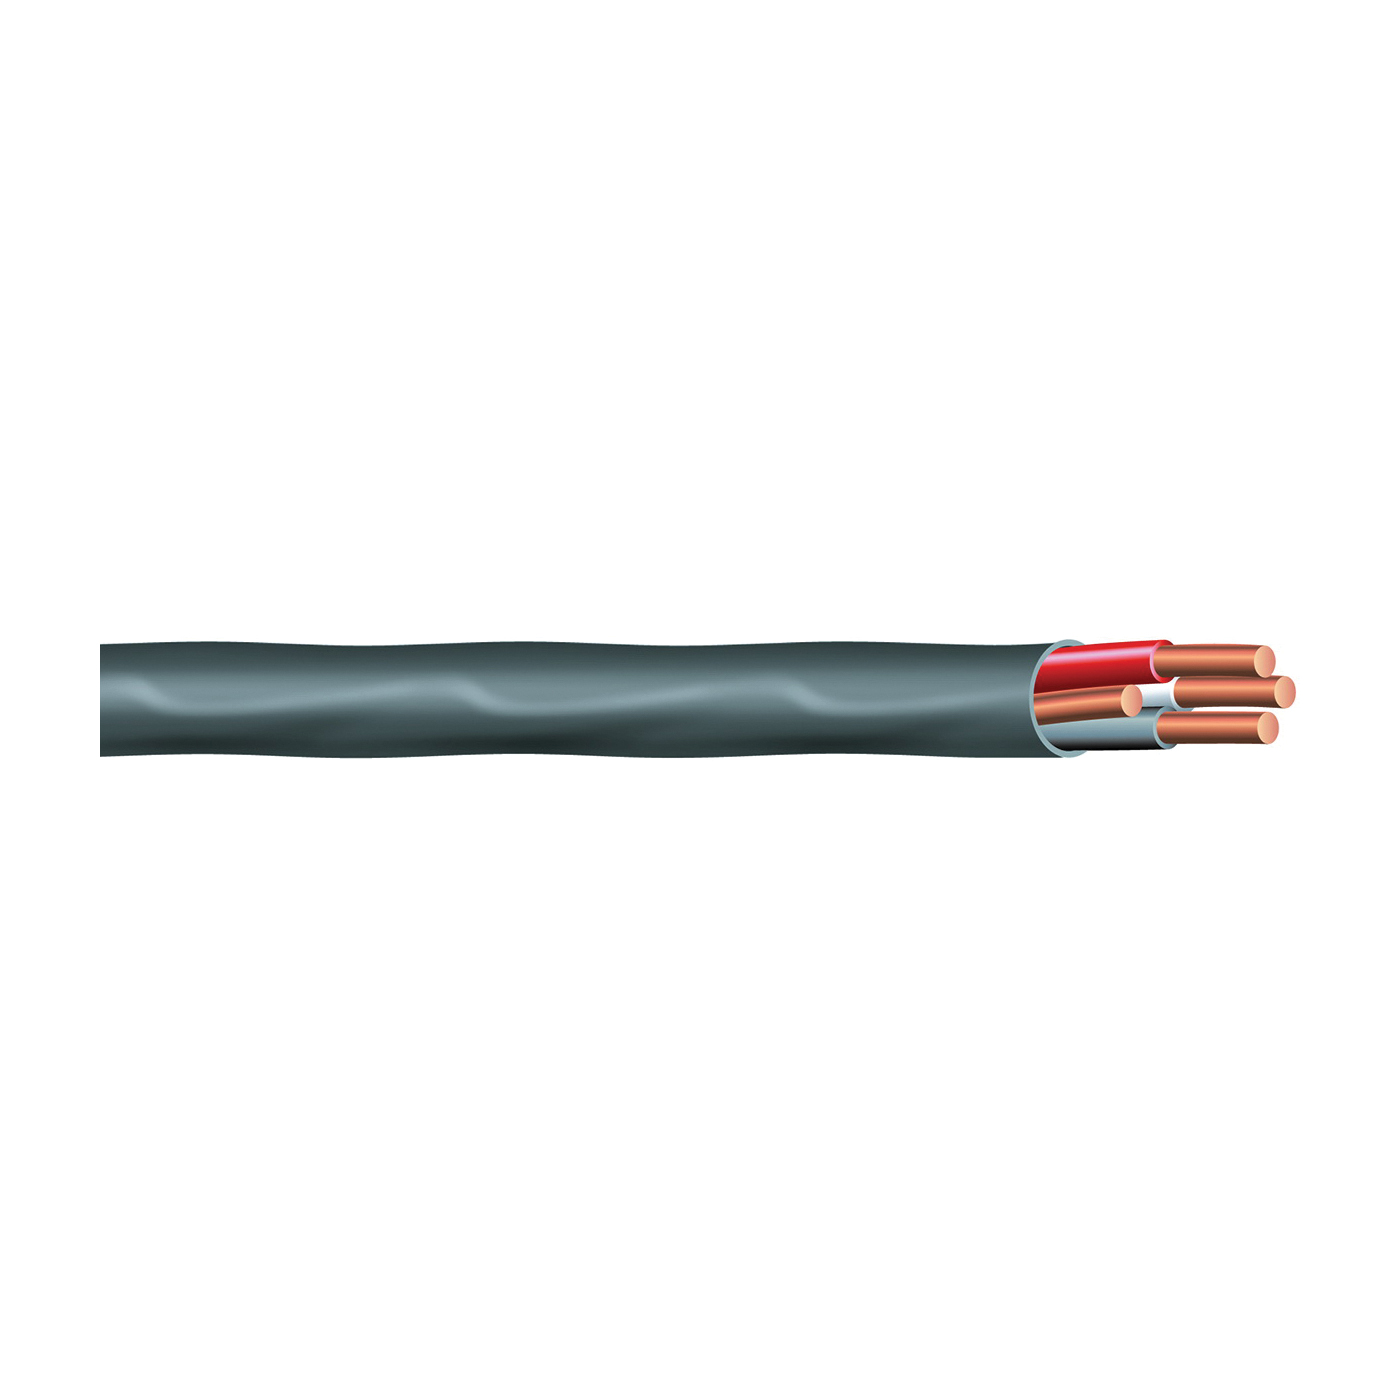 Southwire 63949221 Sheathed Cable, NM-B, 8 AWG Wire, 3 -Conductor, 25 ft L, Copper Conductor, PVC Insulation